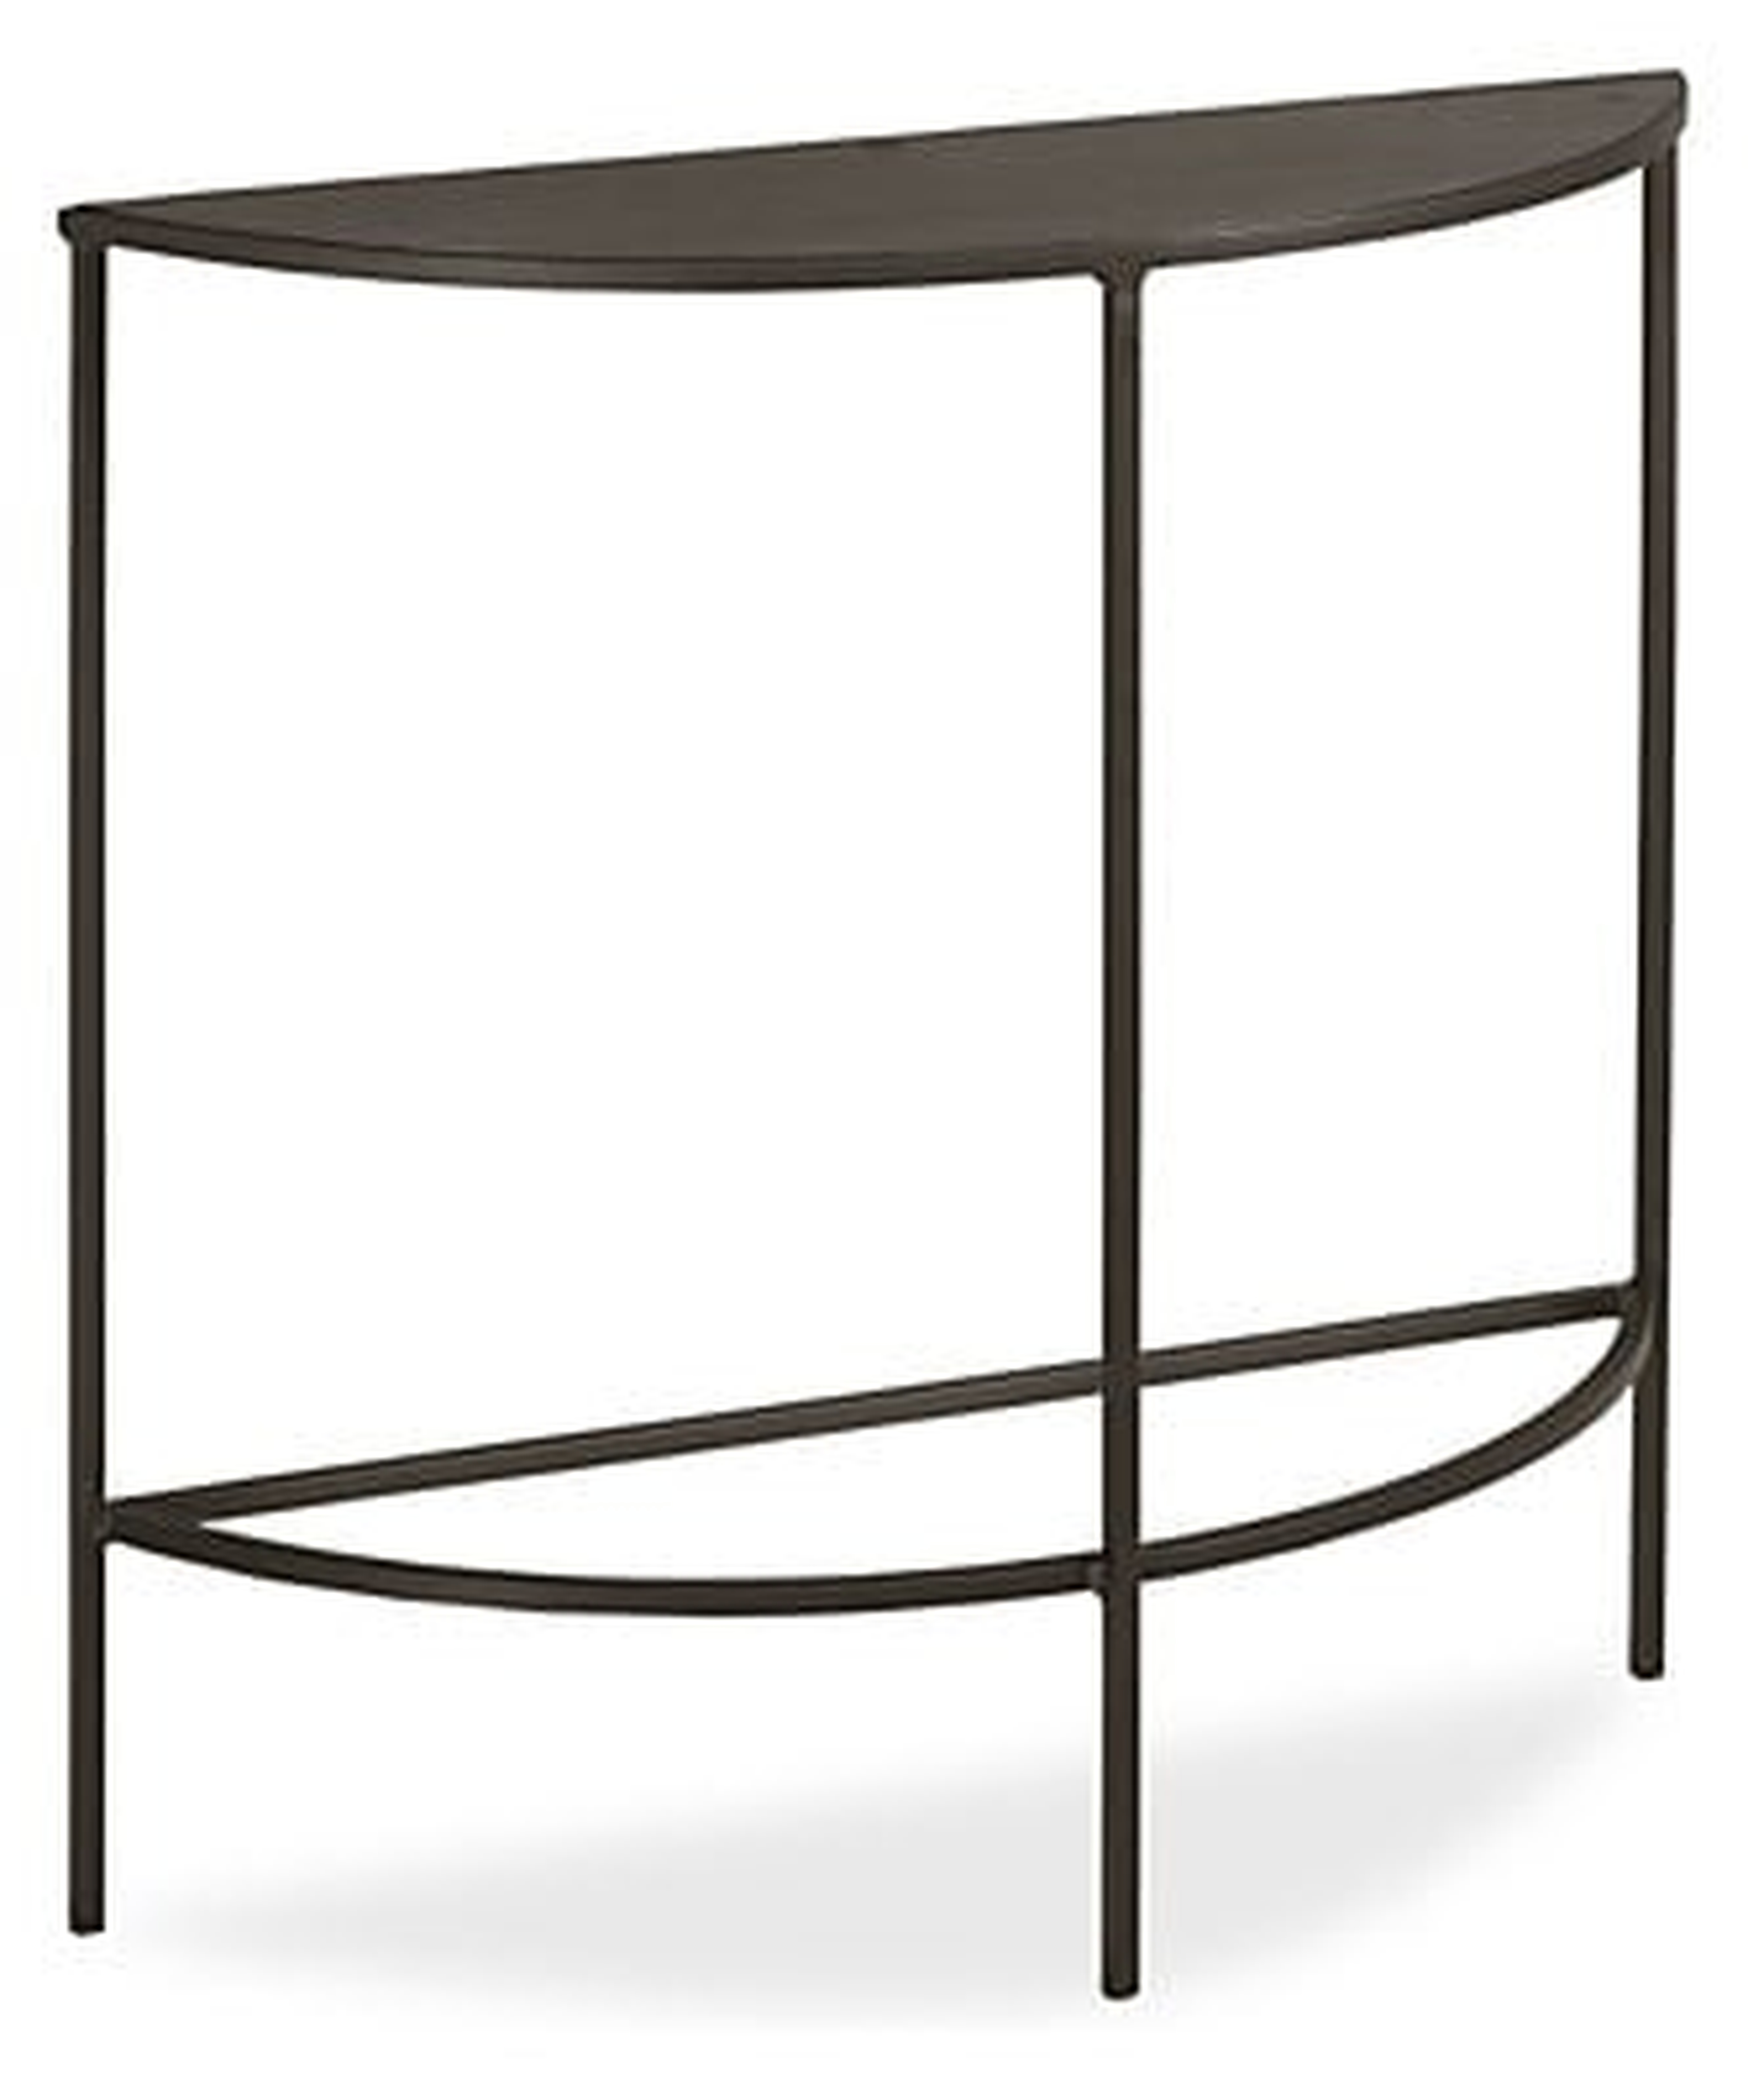 Slim Console Tables in Natural Steel - Room & Board